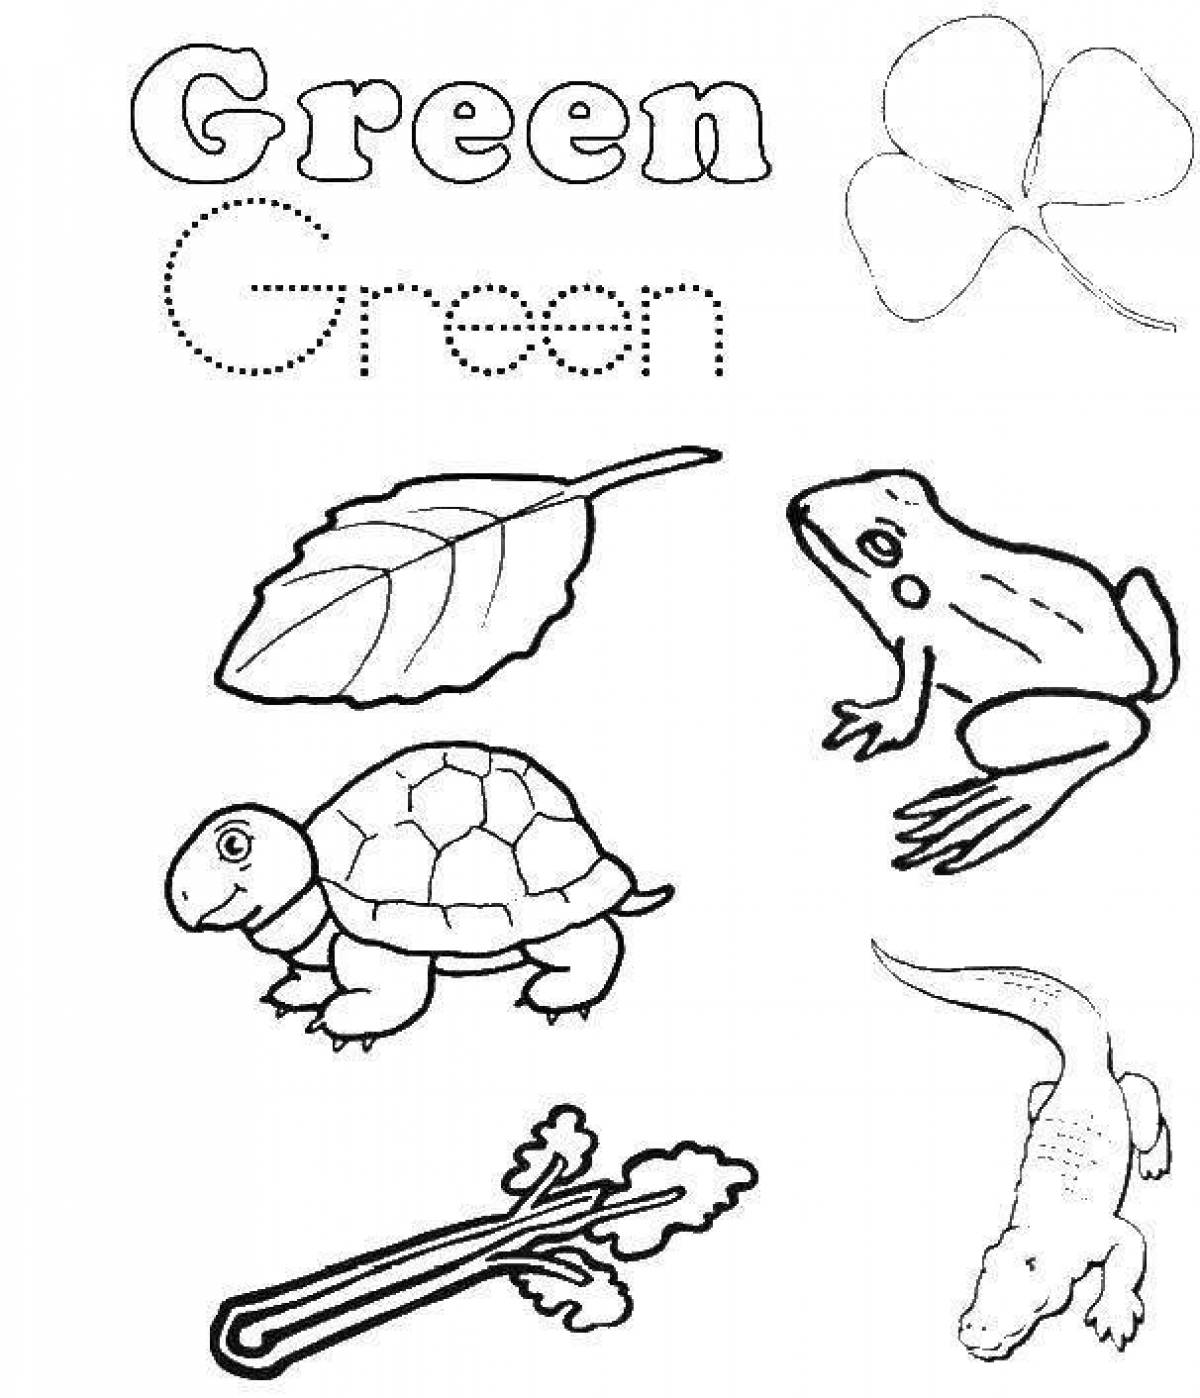 Charming coloring book learning colors